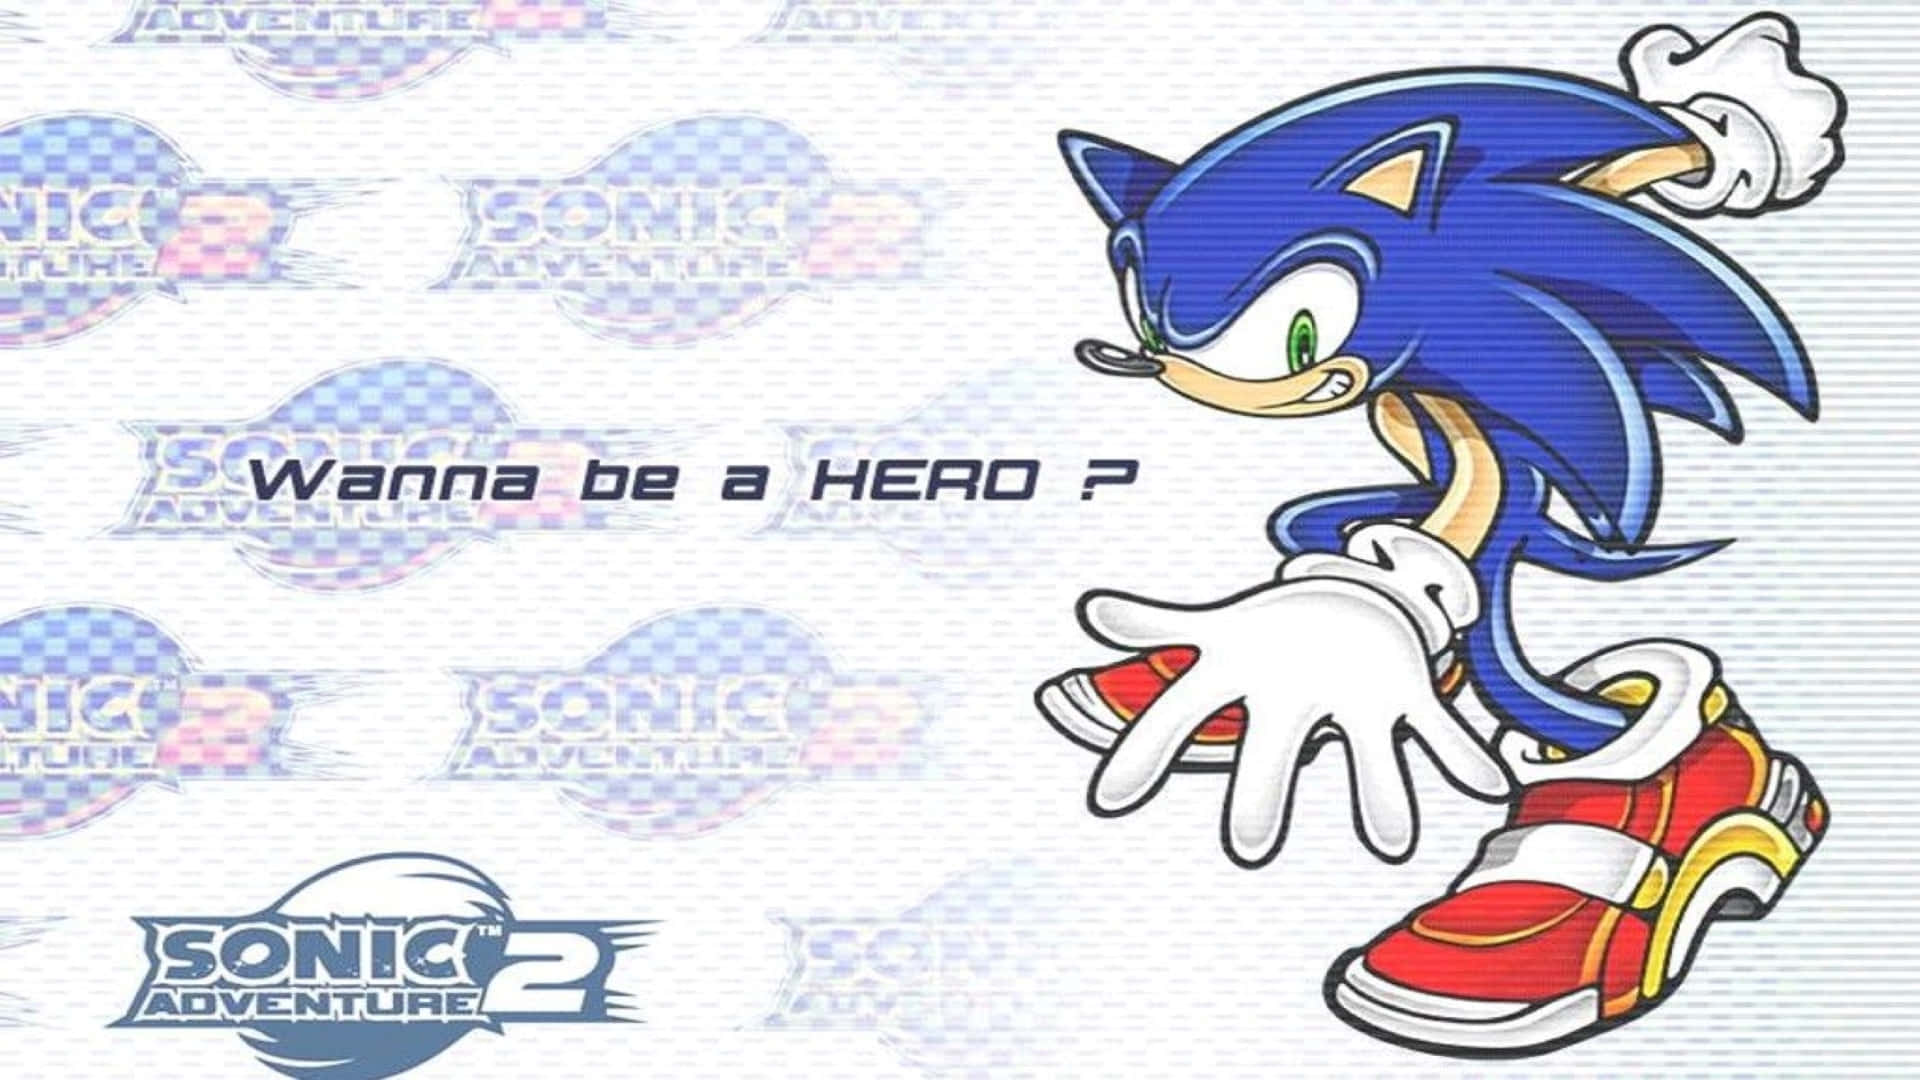 Sonic the Hedgehog racing through a scenic cityscape in Sonic Adventure HD Wallpaper